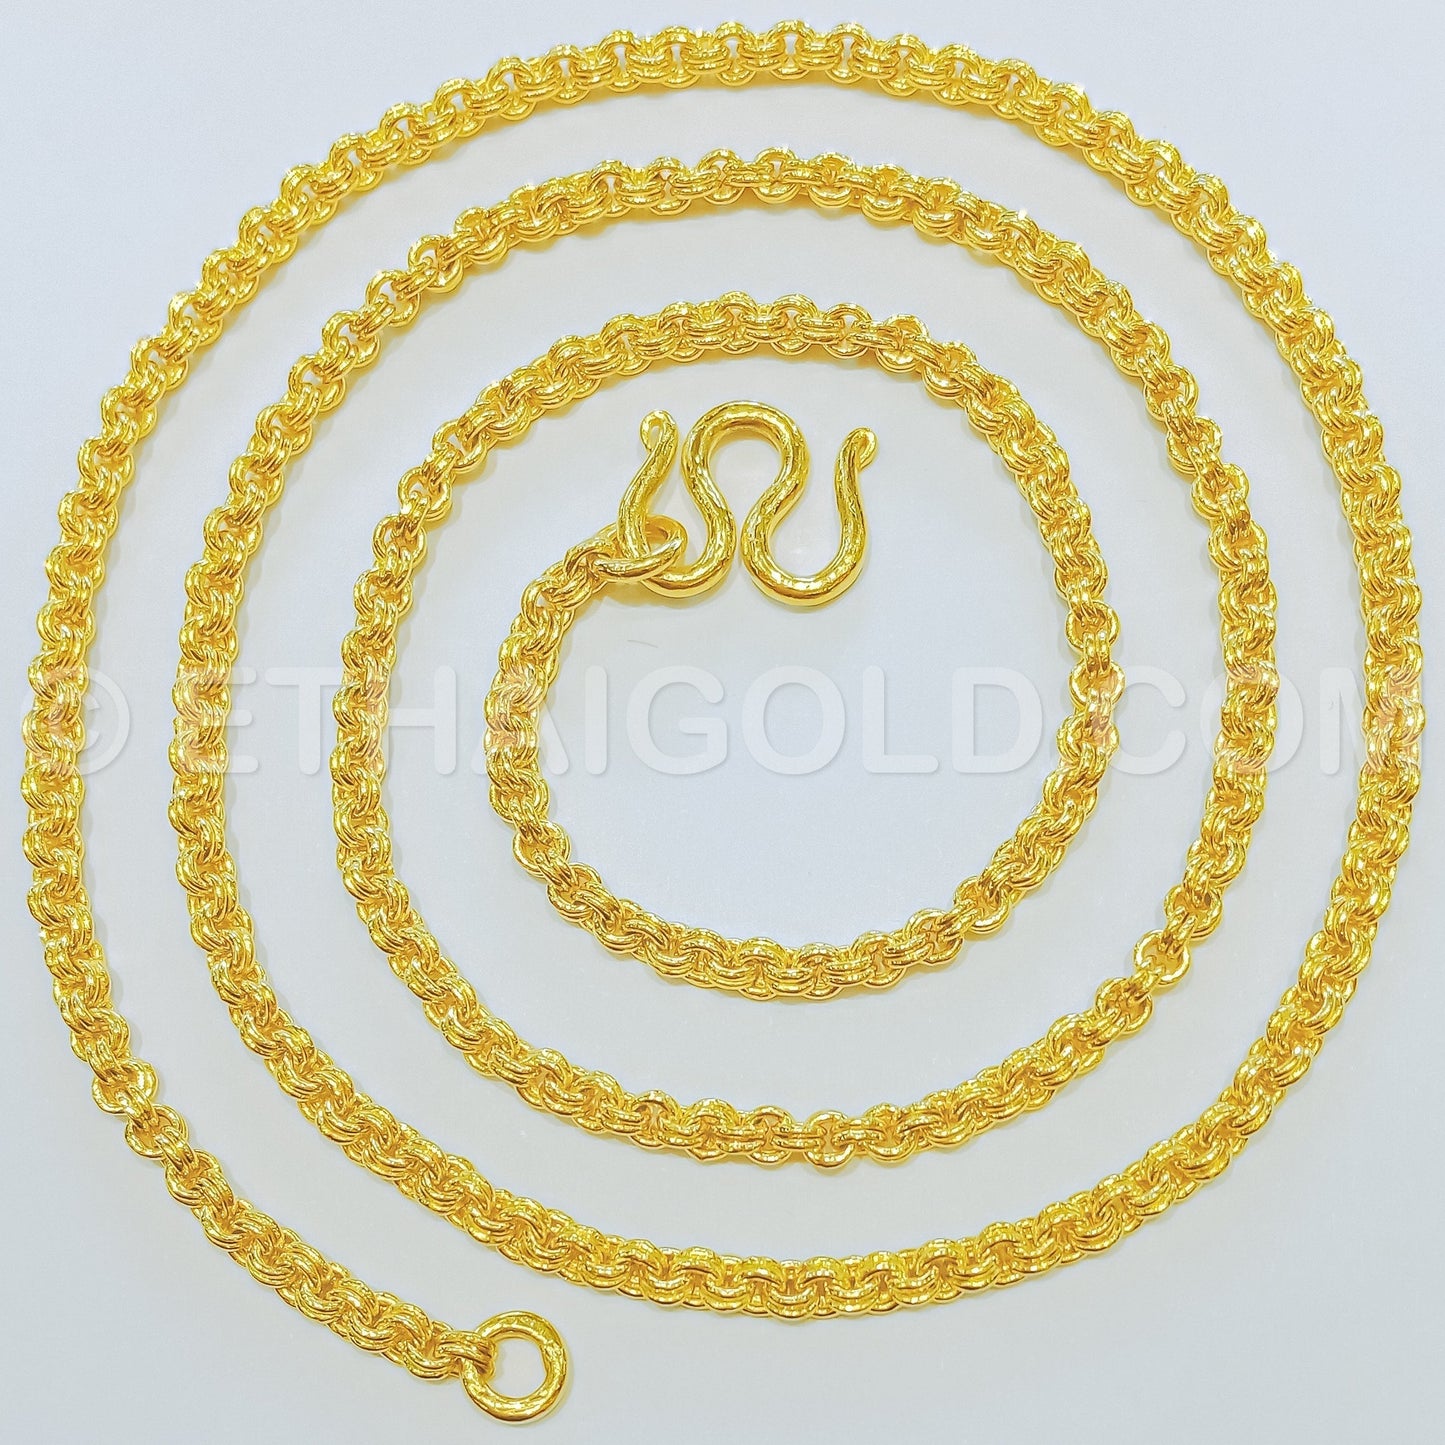 5 BAHT POLISHED SOLID DOUBLE LINK CHAIN NECKLACE IN 23K GOLD (ID: N1105B)